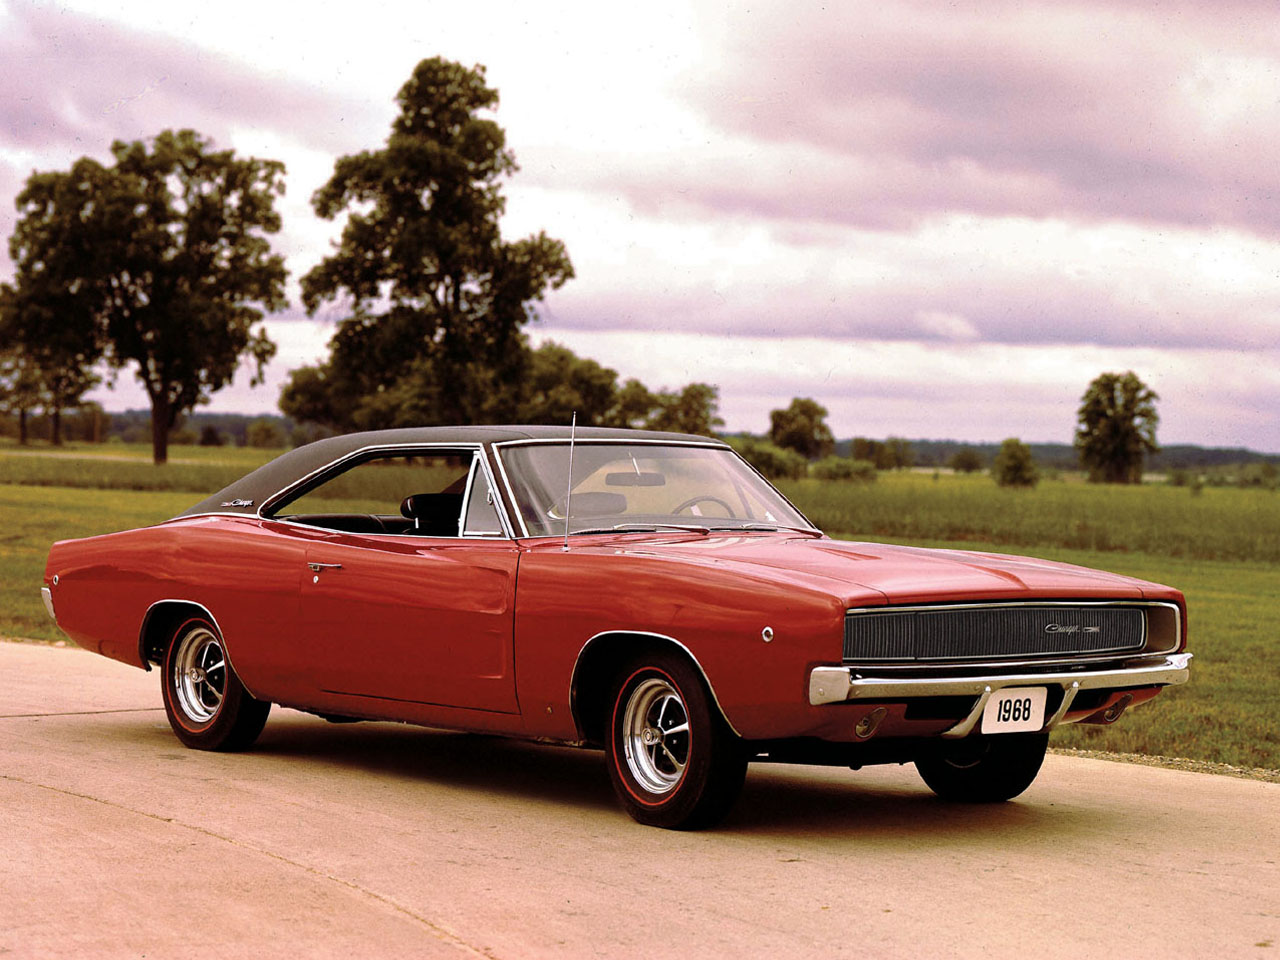 1968 Dodge Charger, 1972 Dodge Charger photo